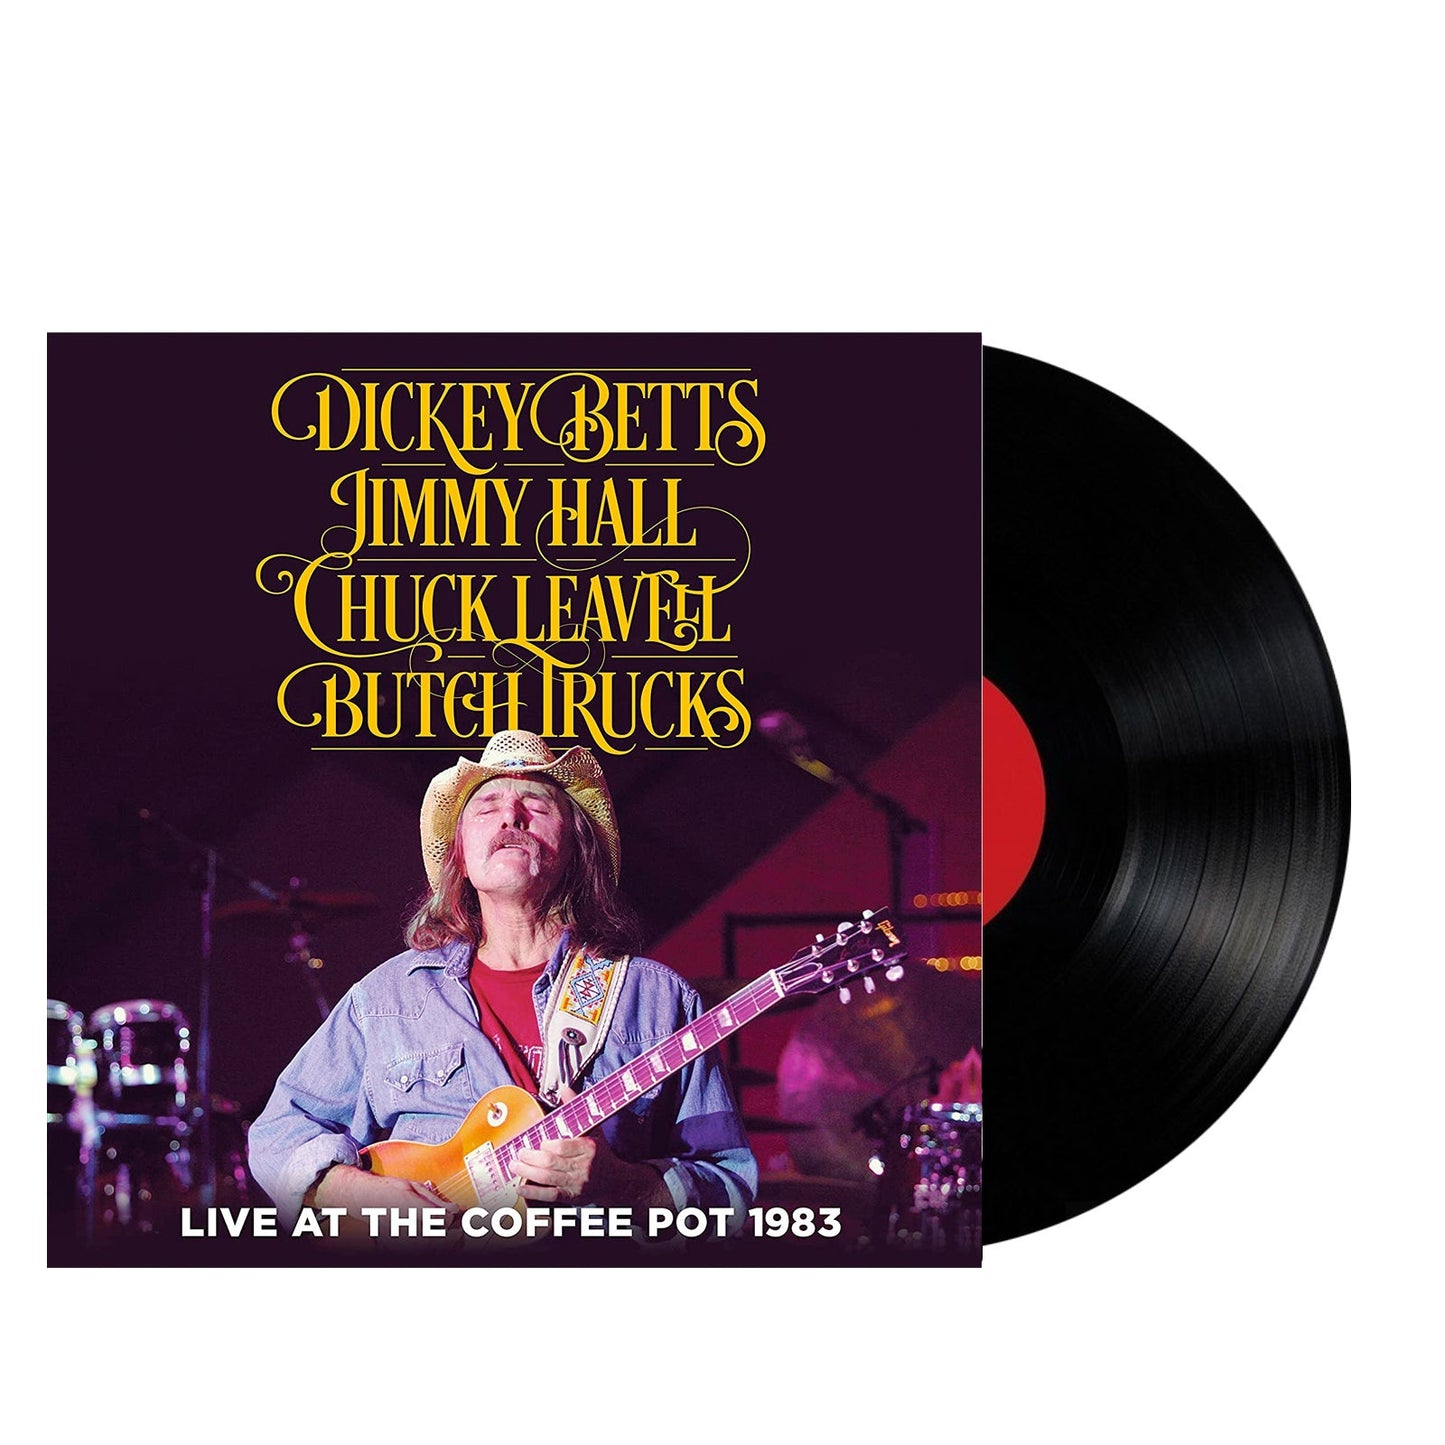 DICKEY BETTS: LIVE AT THE COFFEE POT 1983 LP